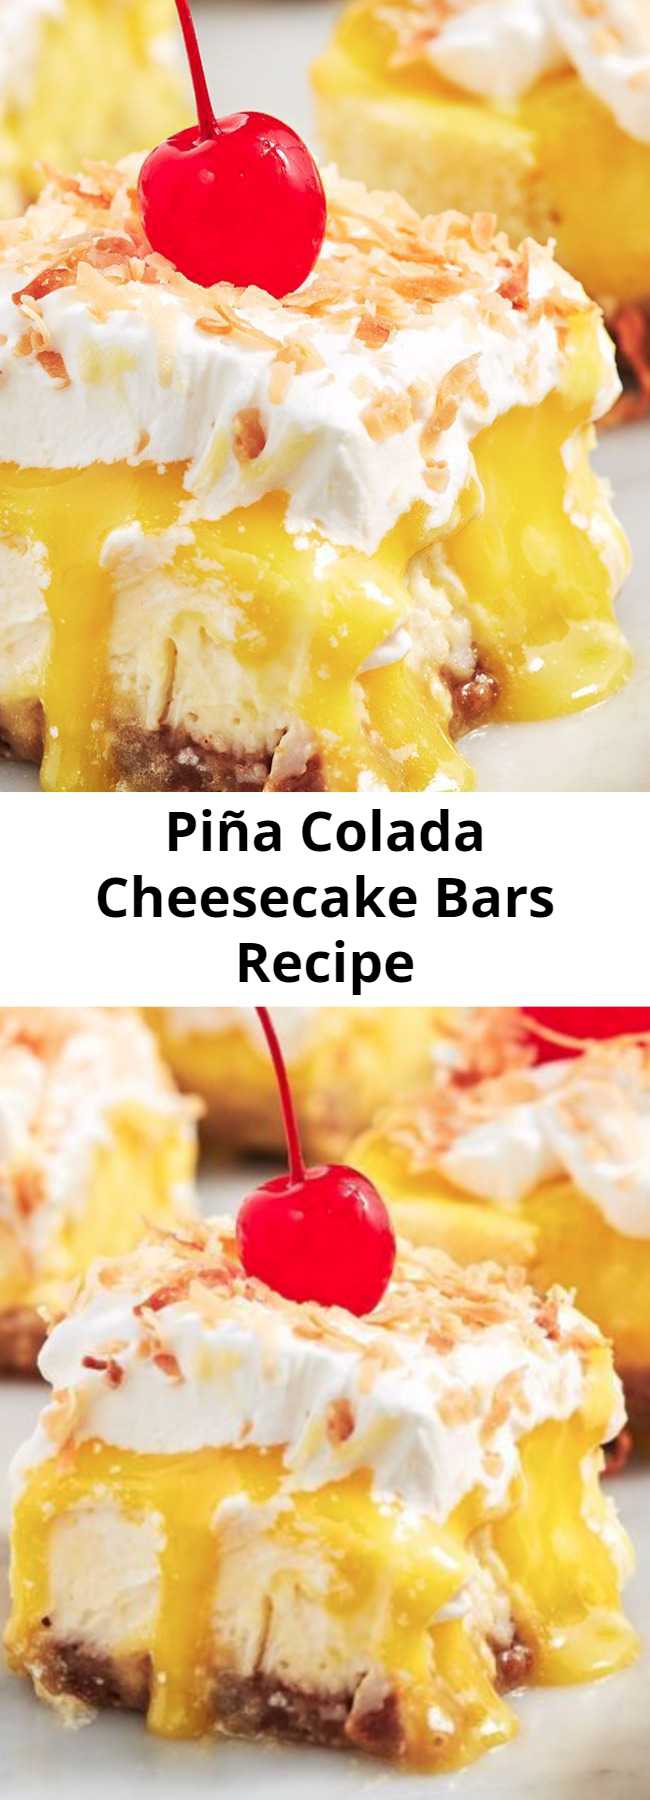 Piña Colada Cheesecake Bars Recipe - The pineapple curd on these bars is TOO good. One bite will transport you to the beach, piña colada in hand. 😎